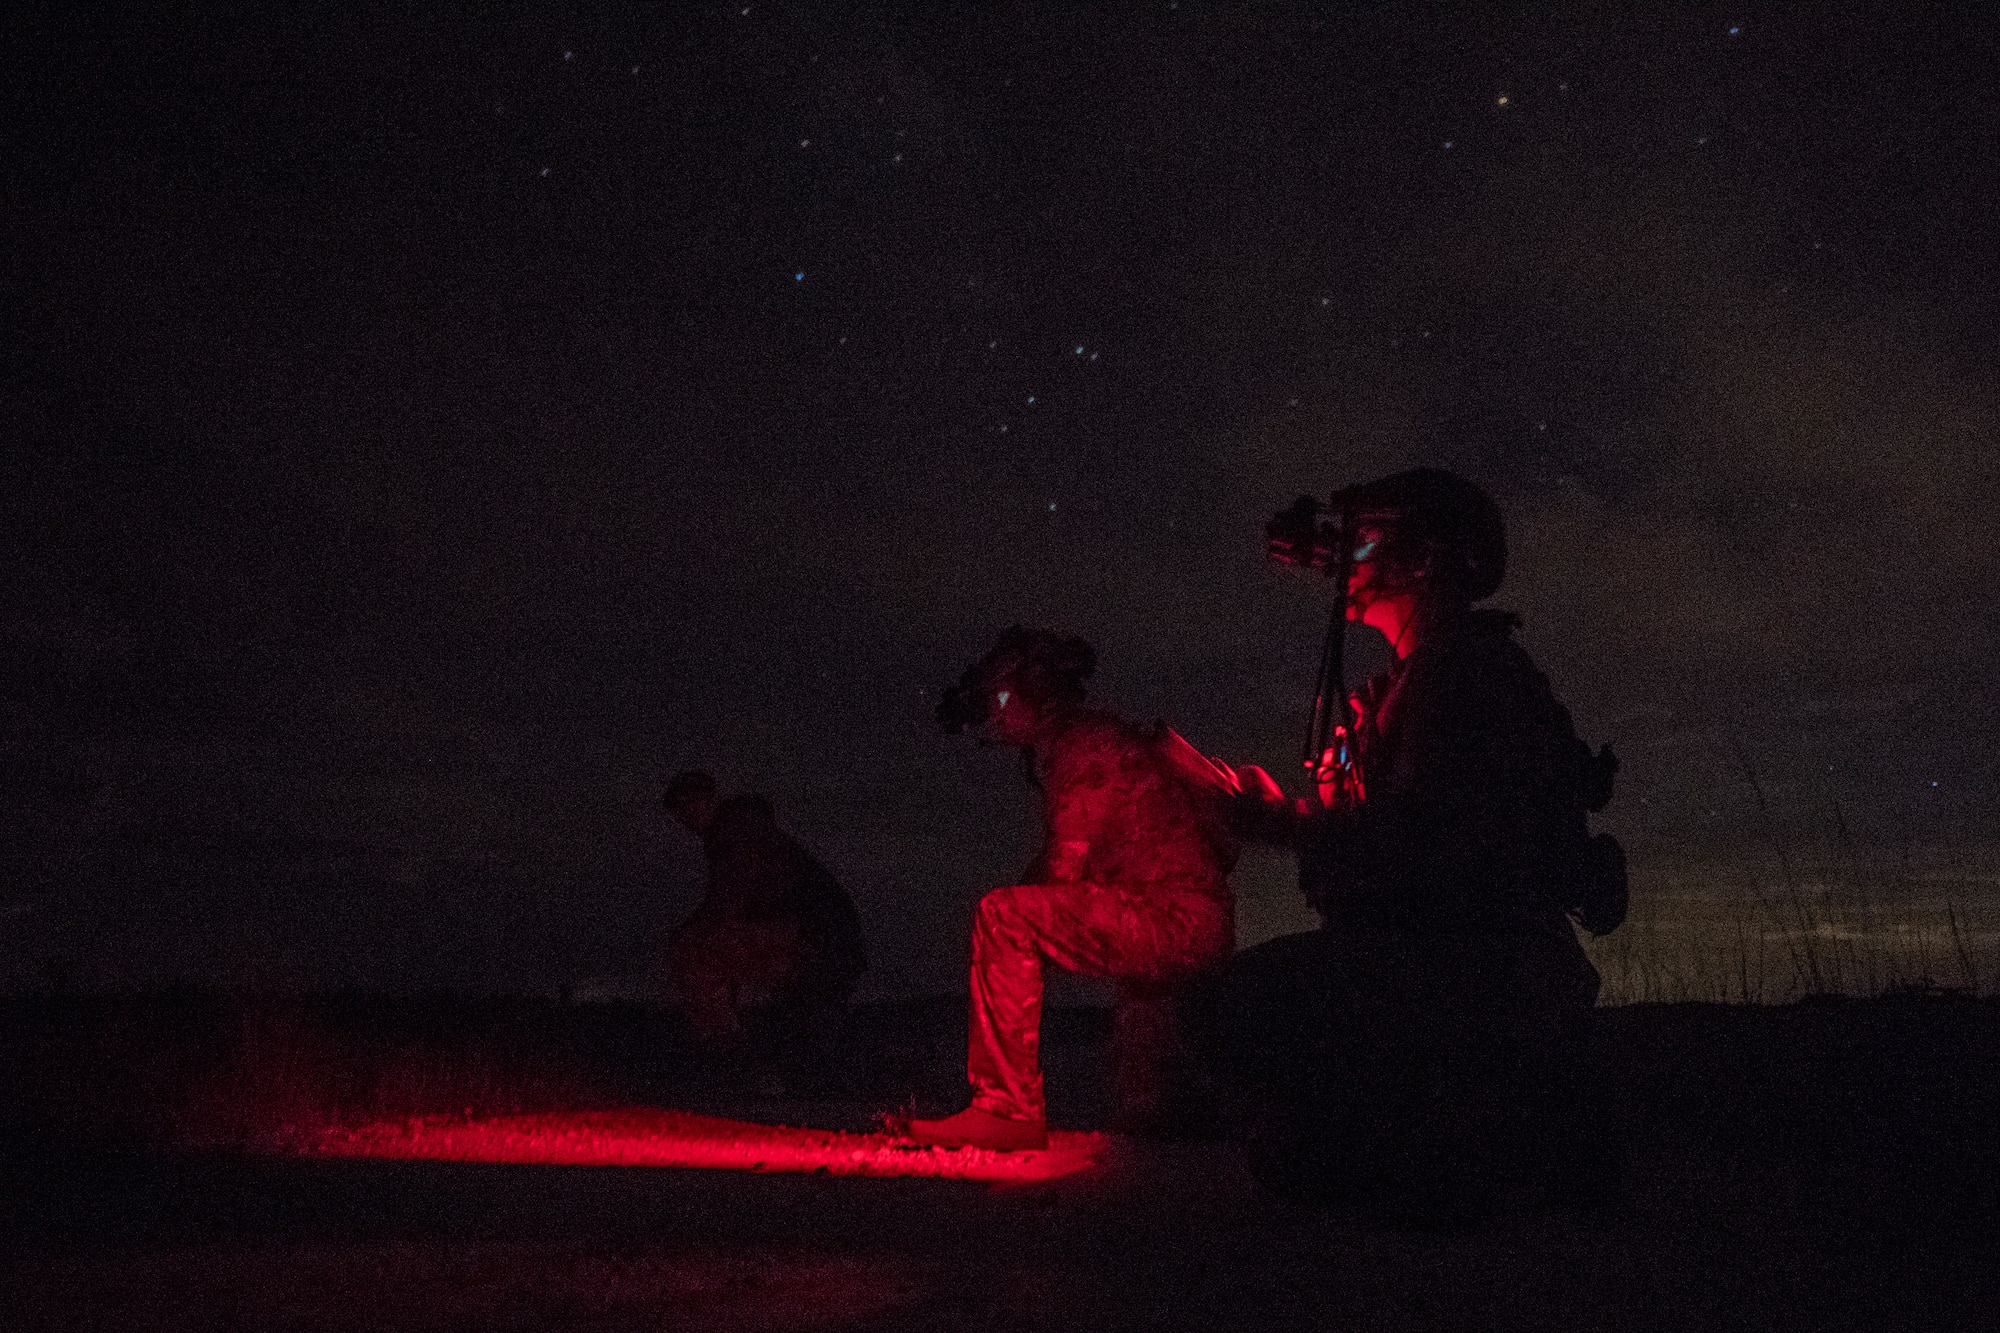 A pair of special operations troops kneel on one knee at night, lit only from low intensity red lighting. Special operations troops from the Army, Air Force, and Marine Corps conduct close air support during the Special Operations Terminal Attack Controller Course at Avon Park Florida, Aug. 6, 2020.